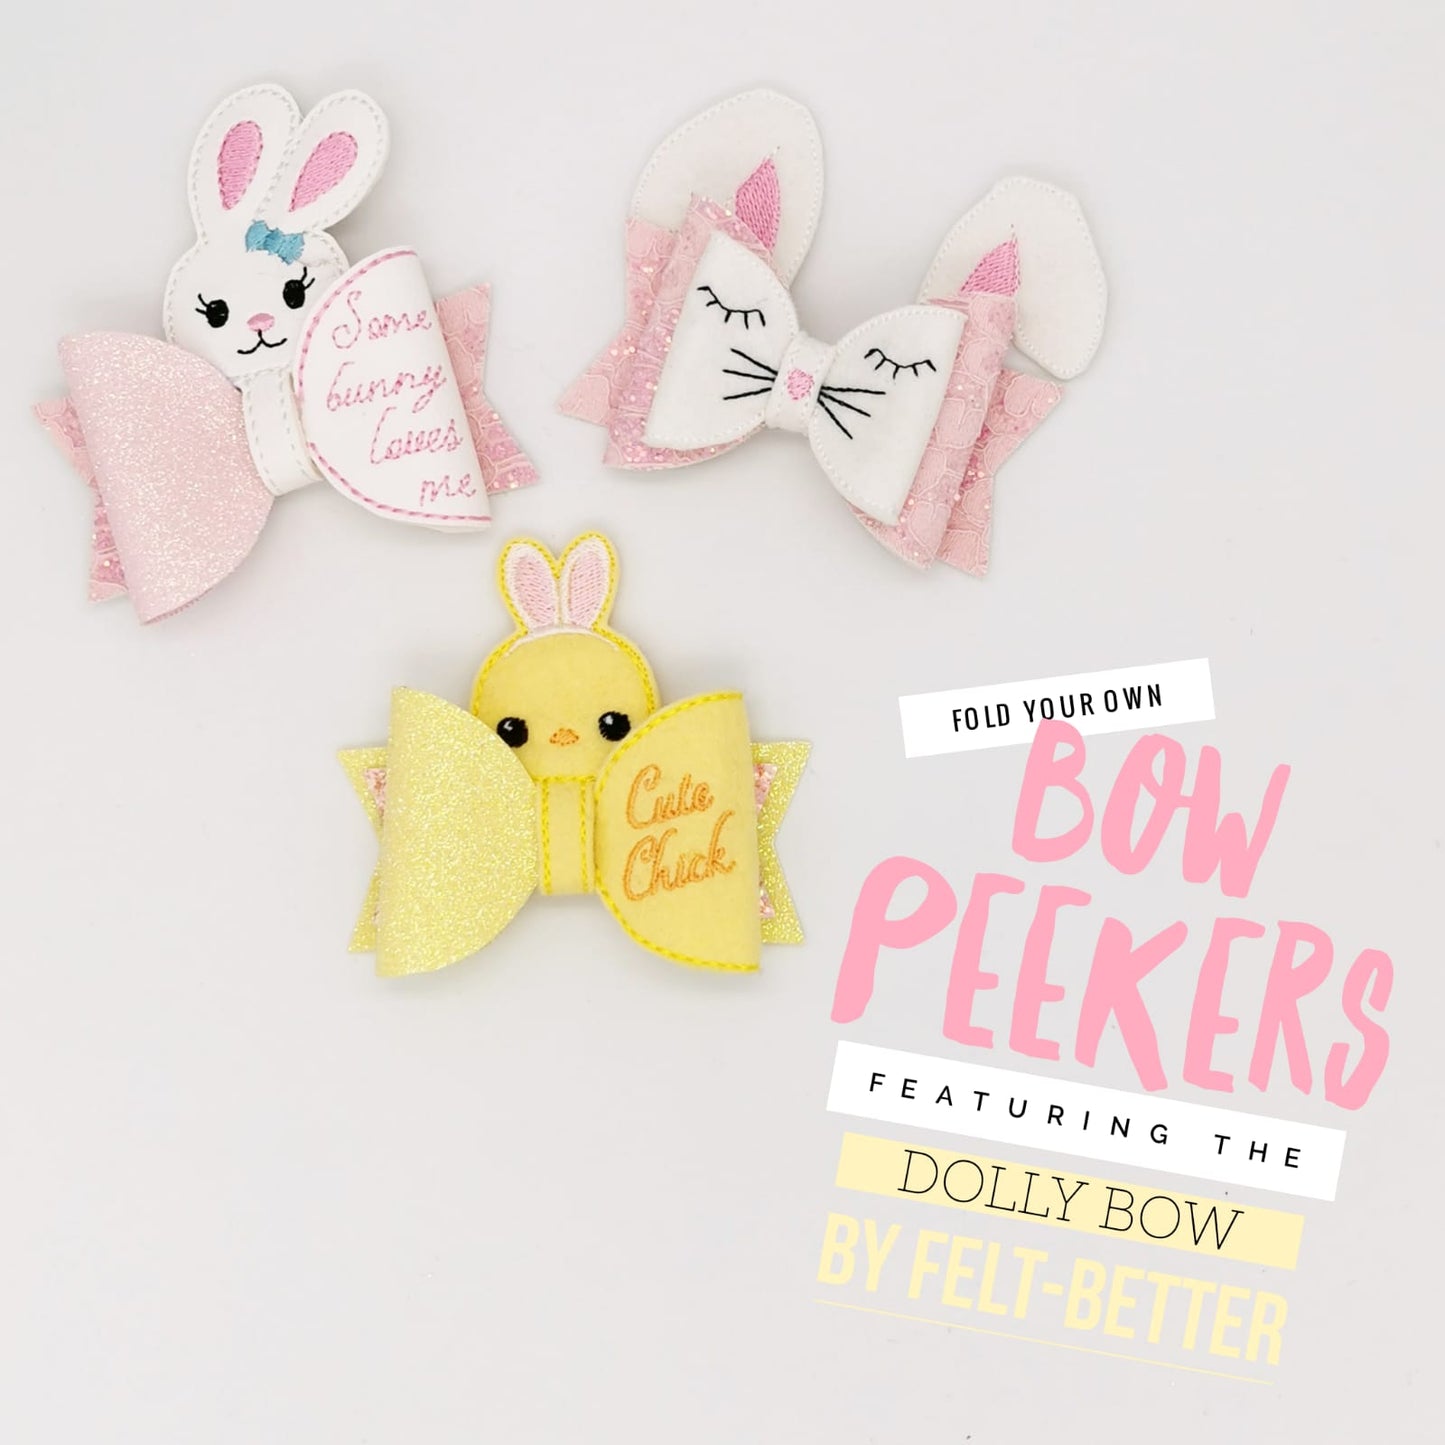 Bunny and Chick Bow Peeker Featuring the Dolly Bow by Felt Better